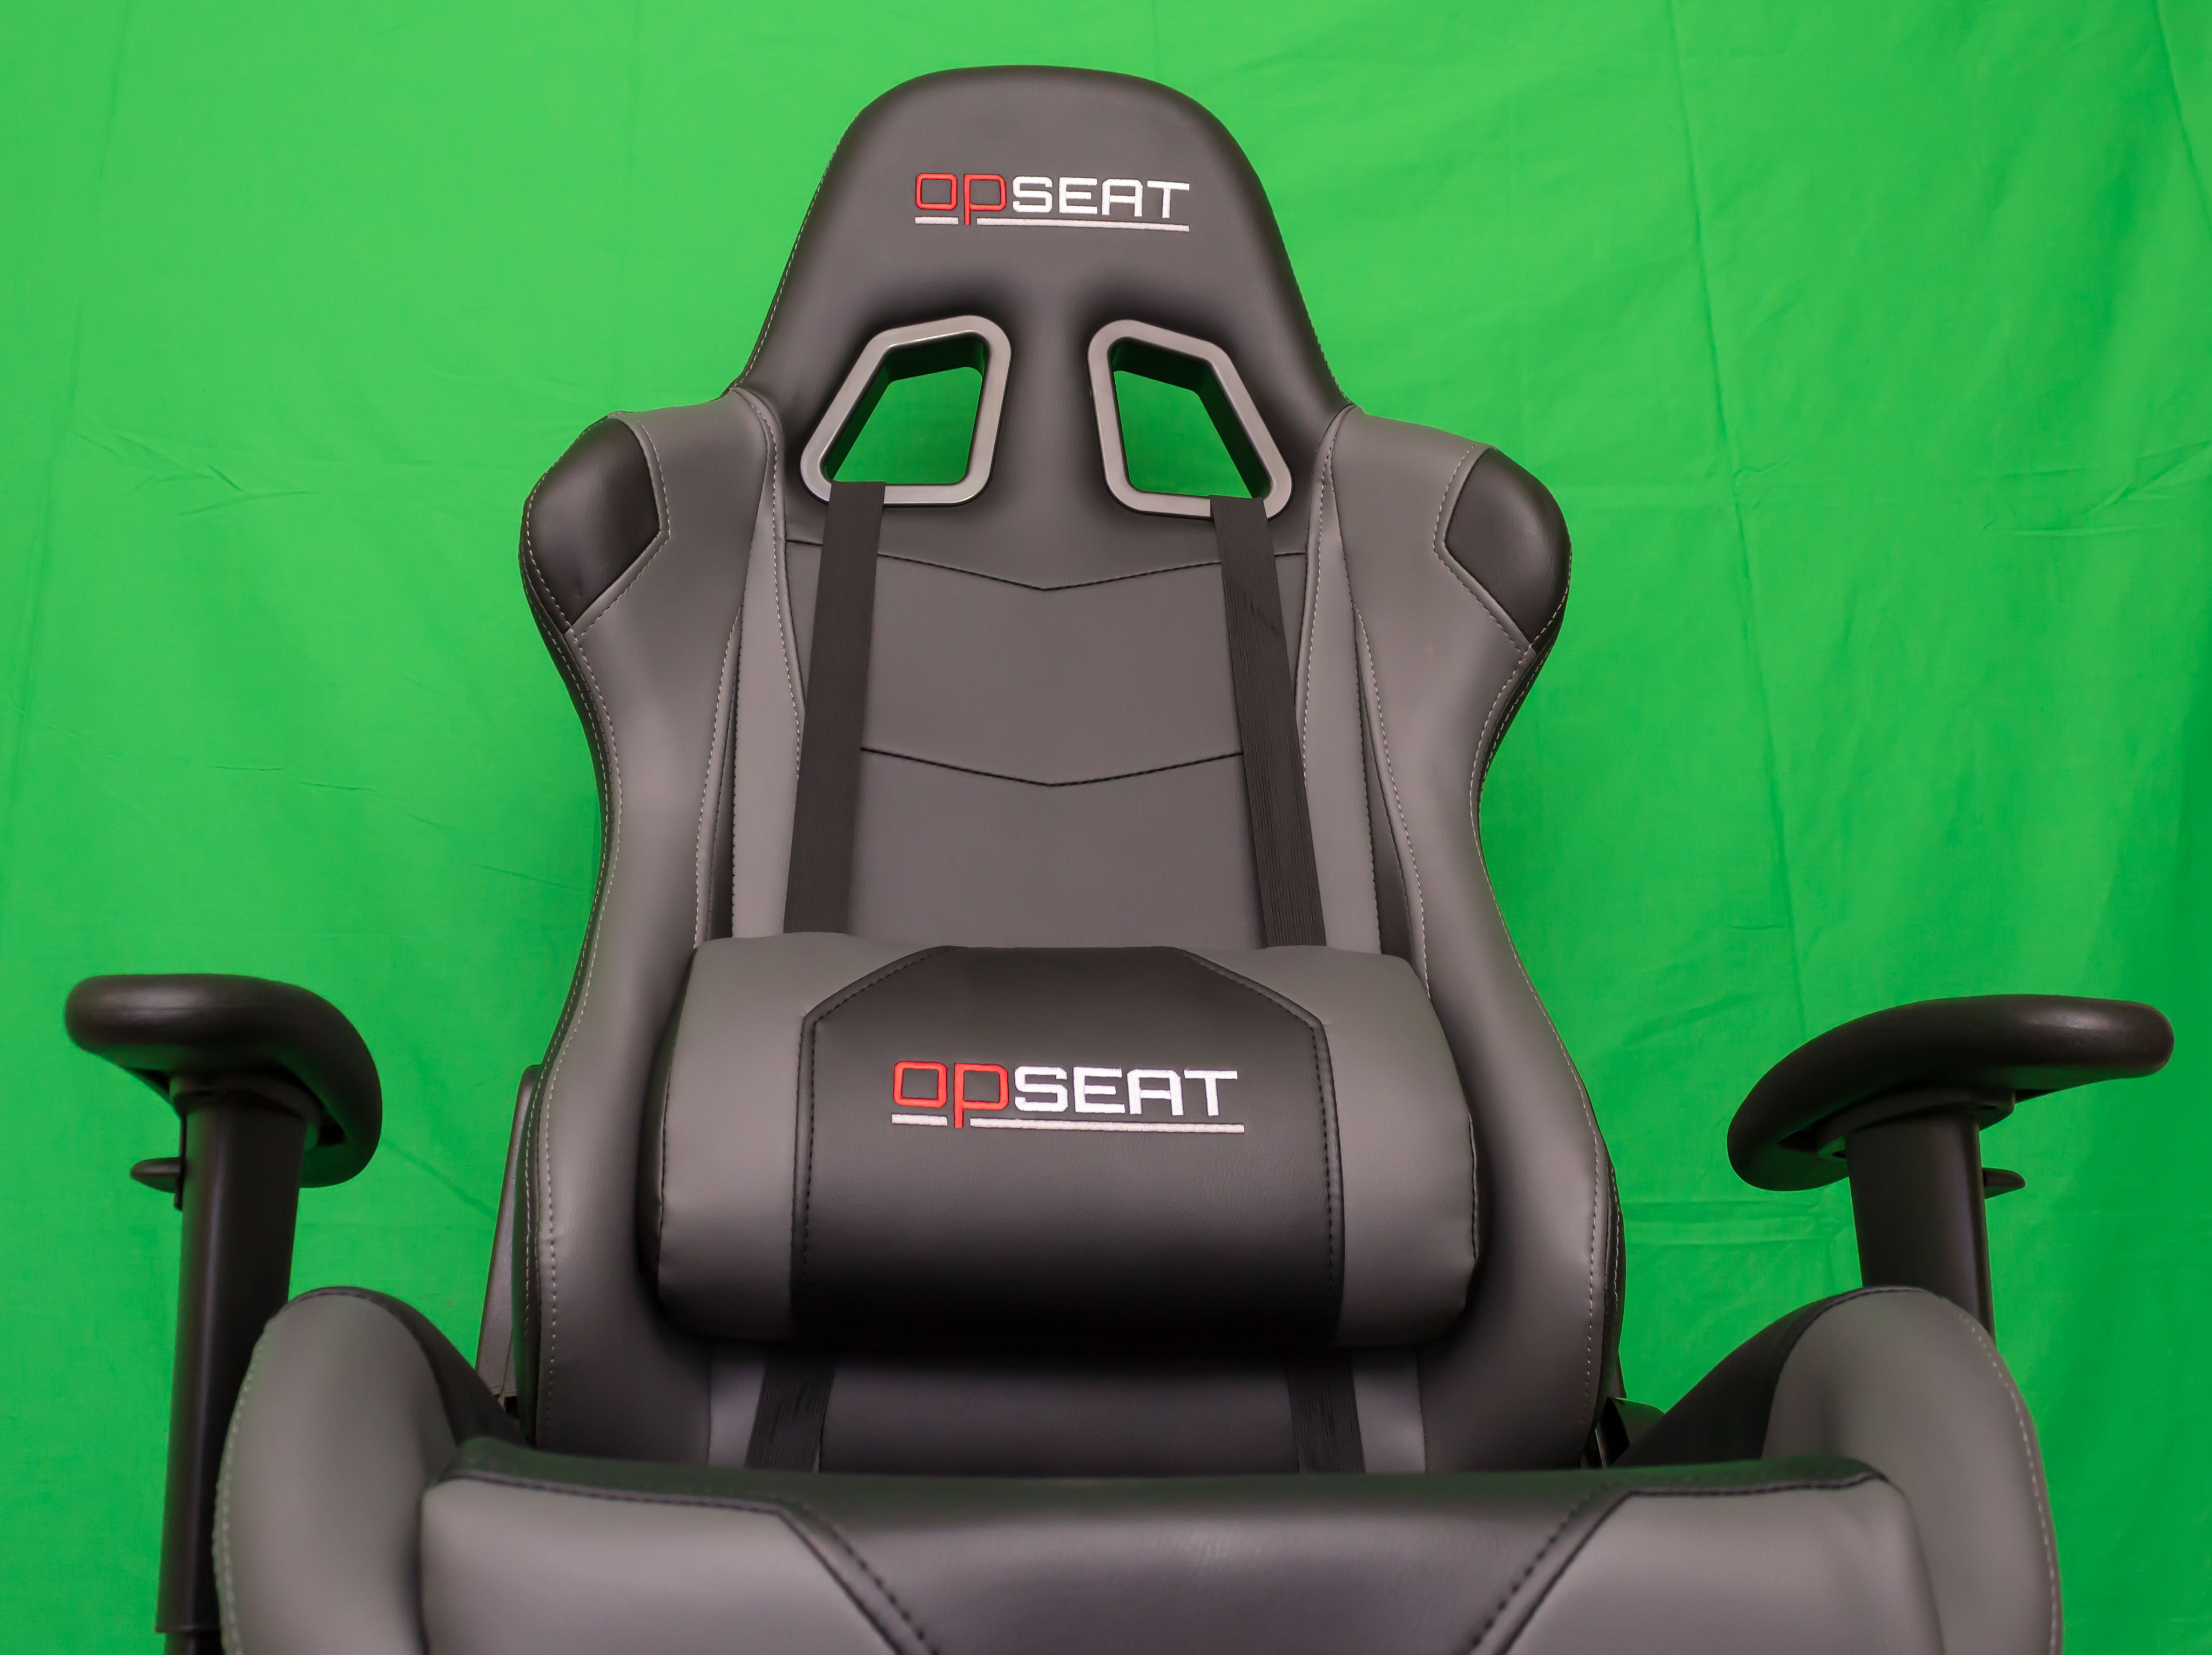 OPseat Gaming Chair Review, Unboxing, and Spinning with Psynaps